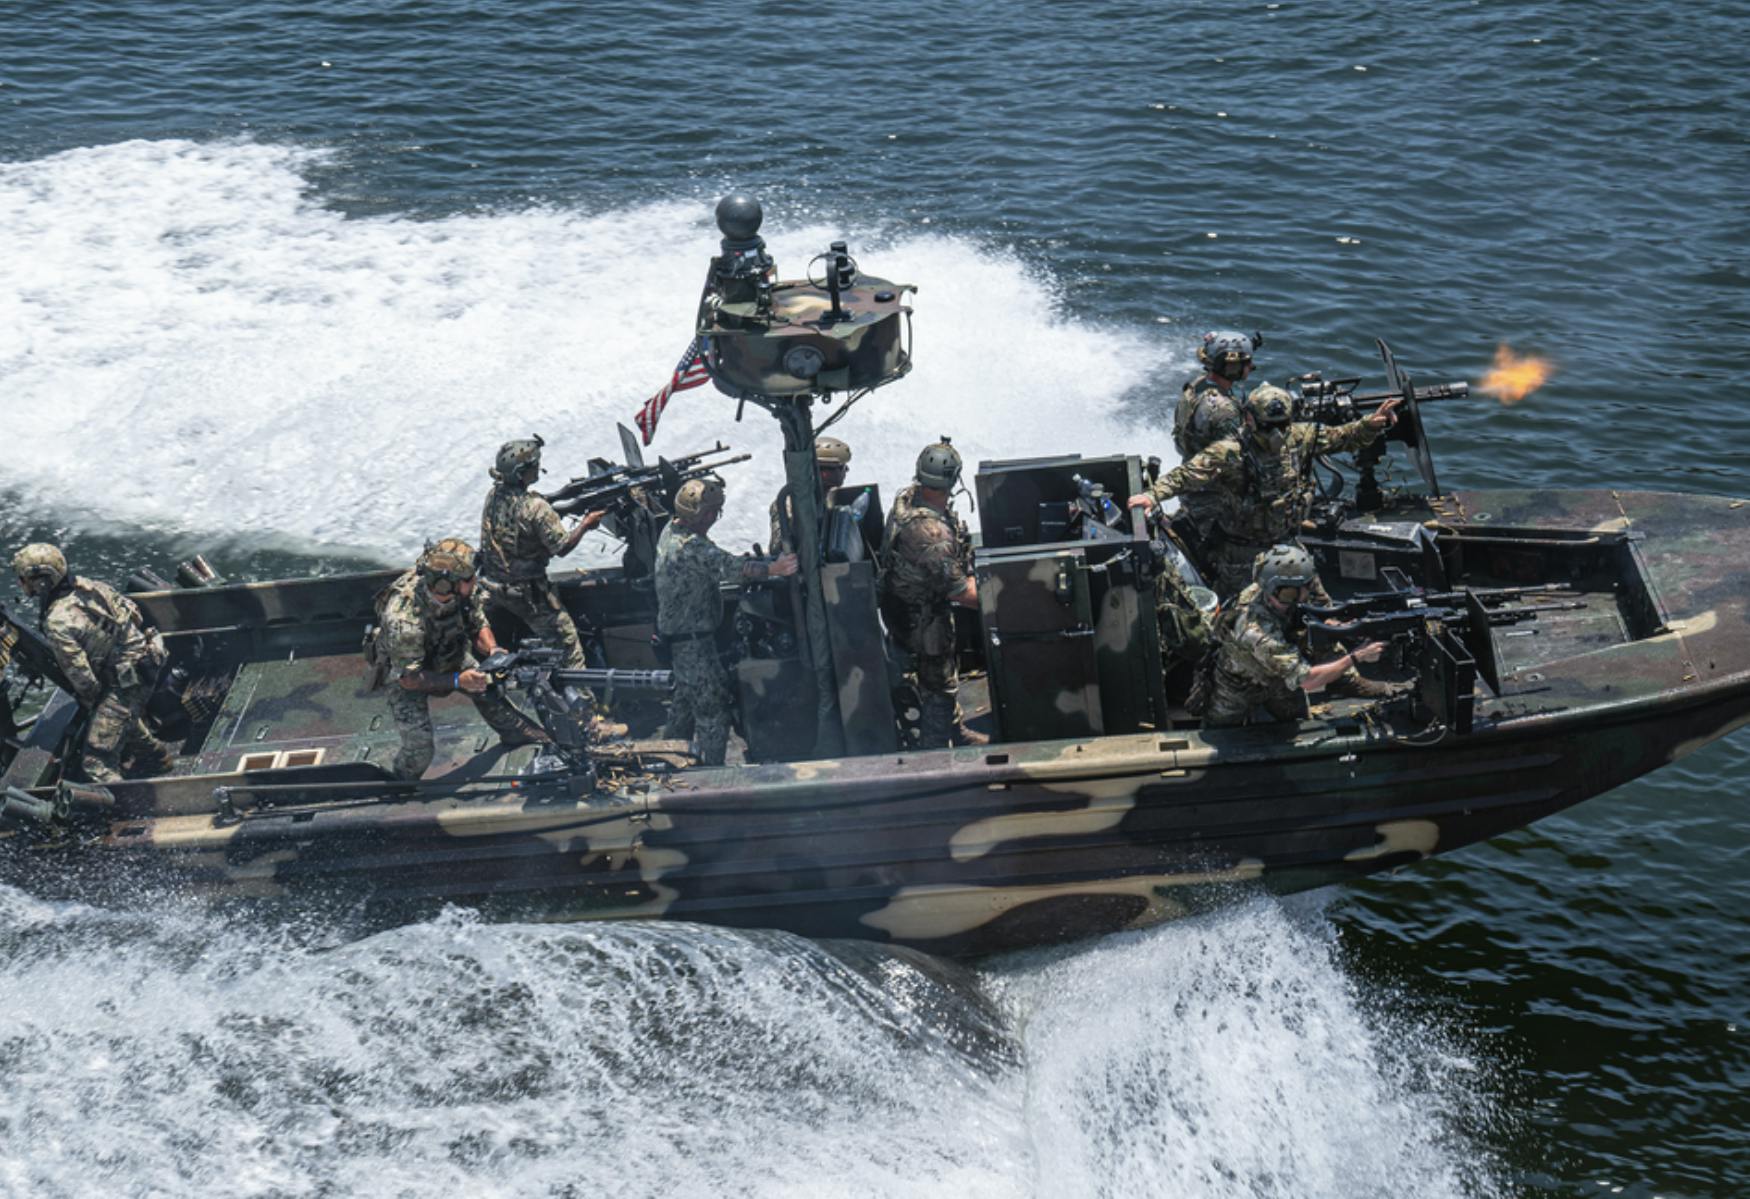 Image of army flat boat with soldiers aboard. Related to: SOCOM, eliminating technical debt, future cloud security, cloud security.